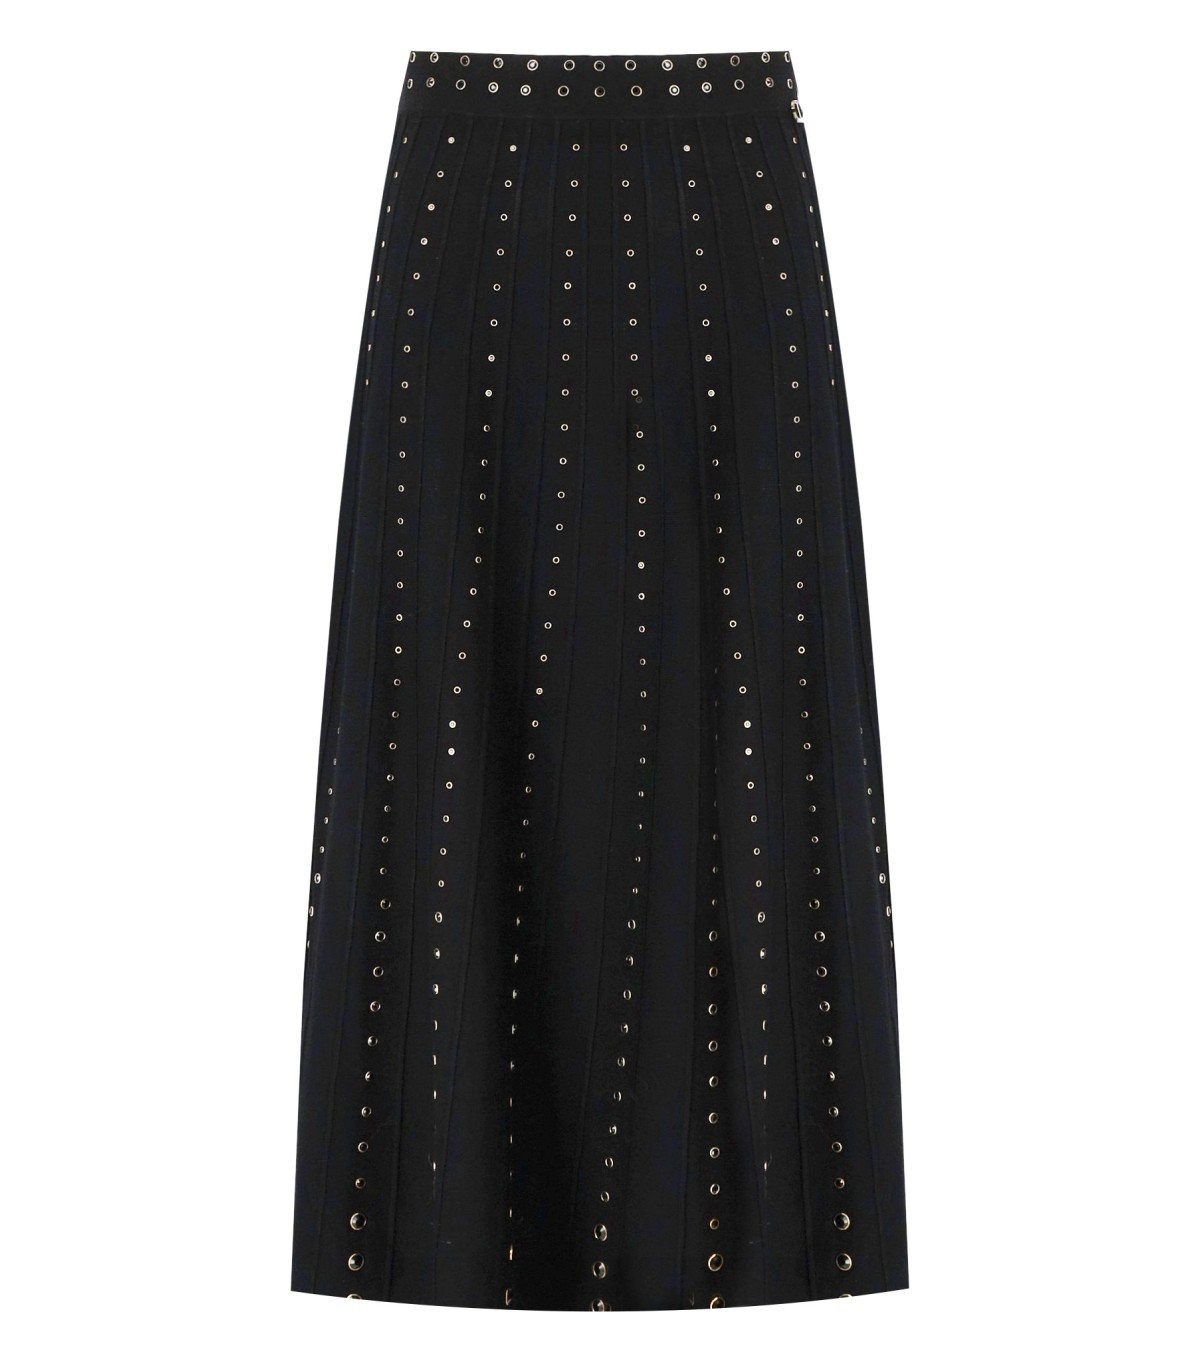 TWINSET BLACK KNITTED MIDI SKIRT WITH STUDS